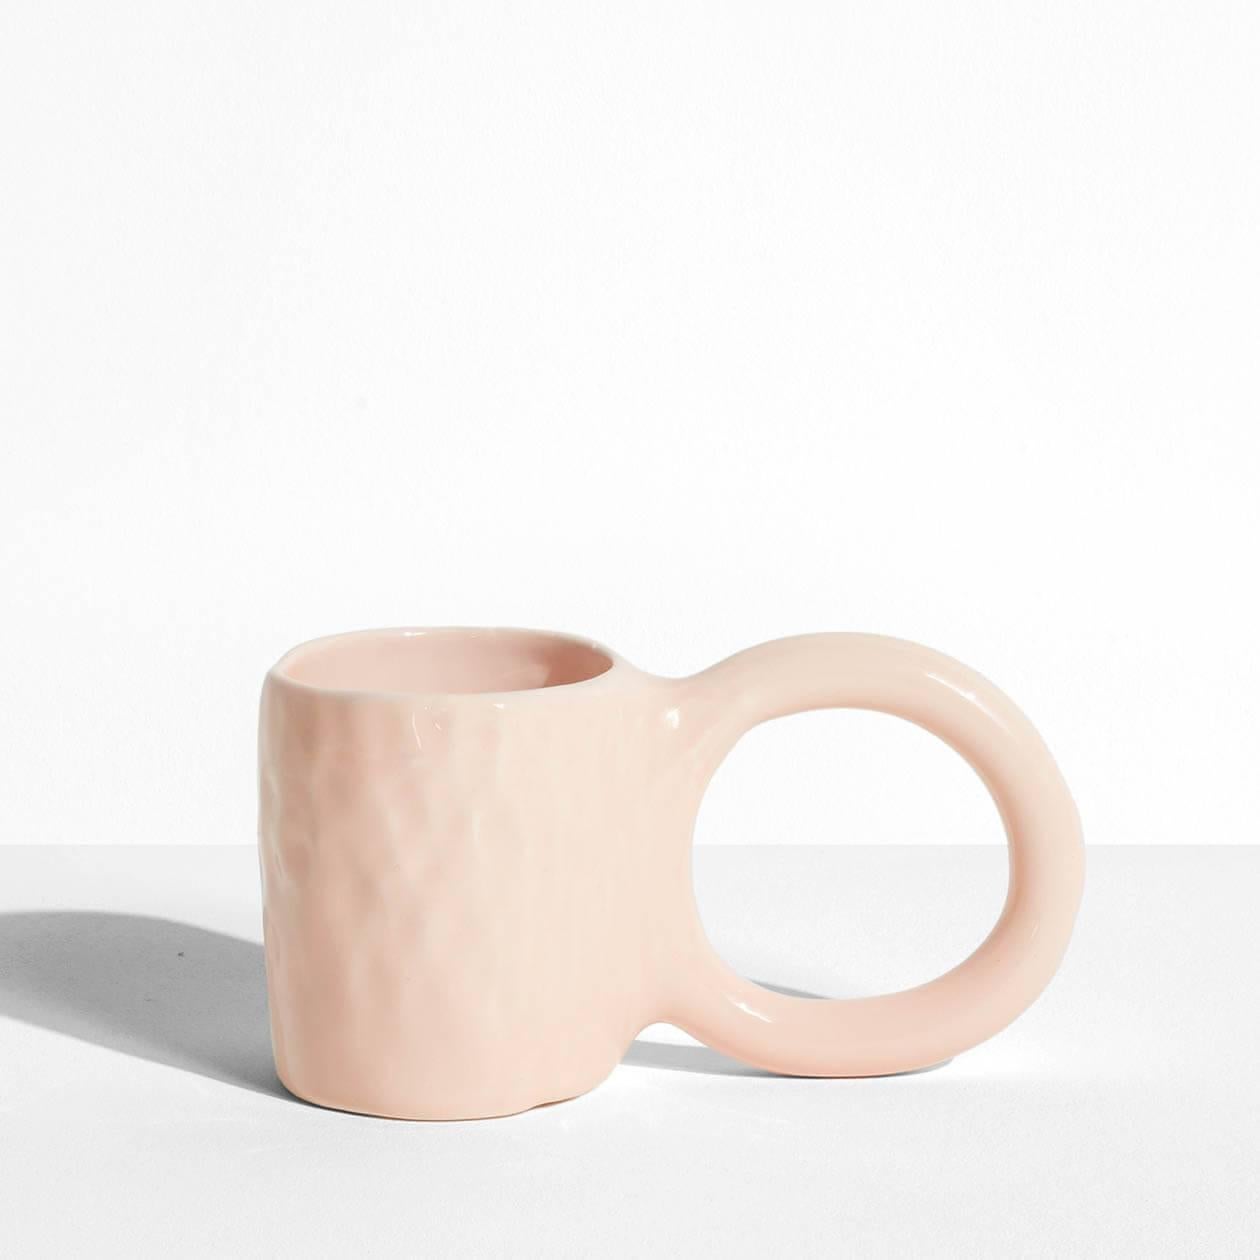 In creating the Donut collection, designer Pia Chevalier drew her inspiration from the world of baking. The ceramic artist imagined these cups and mugs as cakes – their handles representing the dough, and a varnished finish for a sugar-glazed